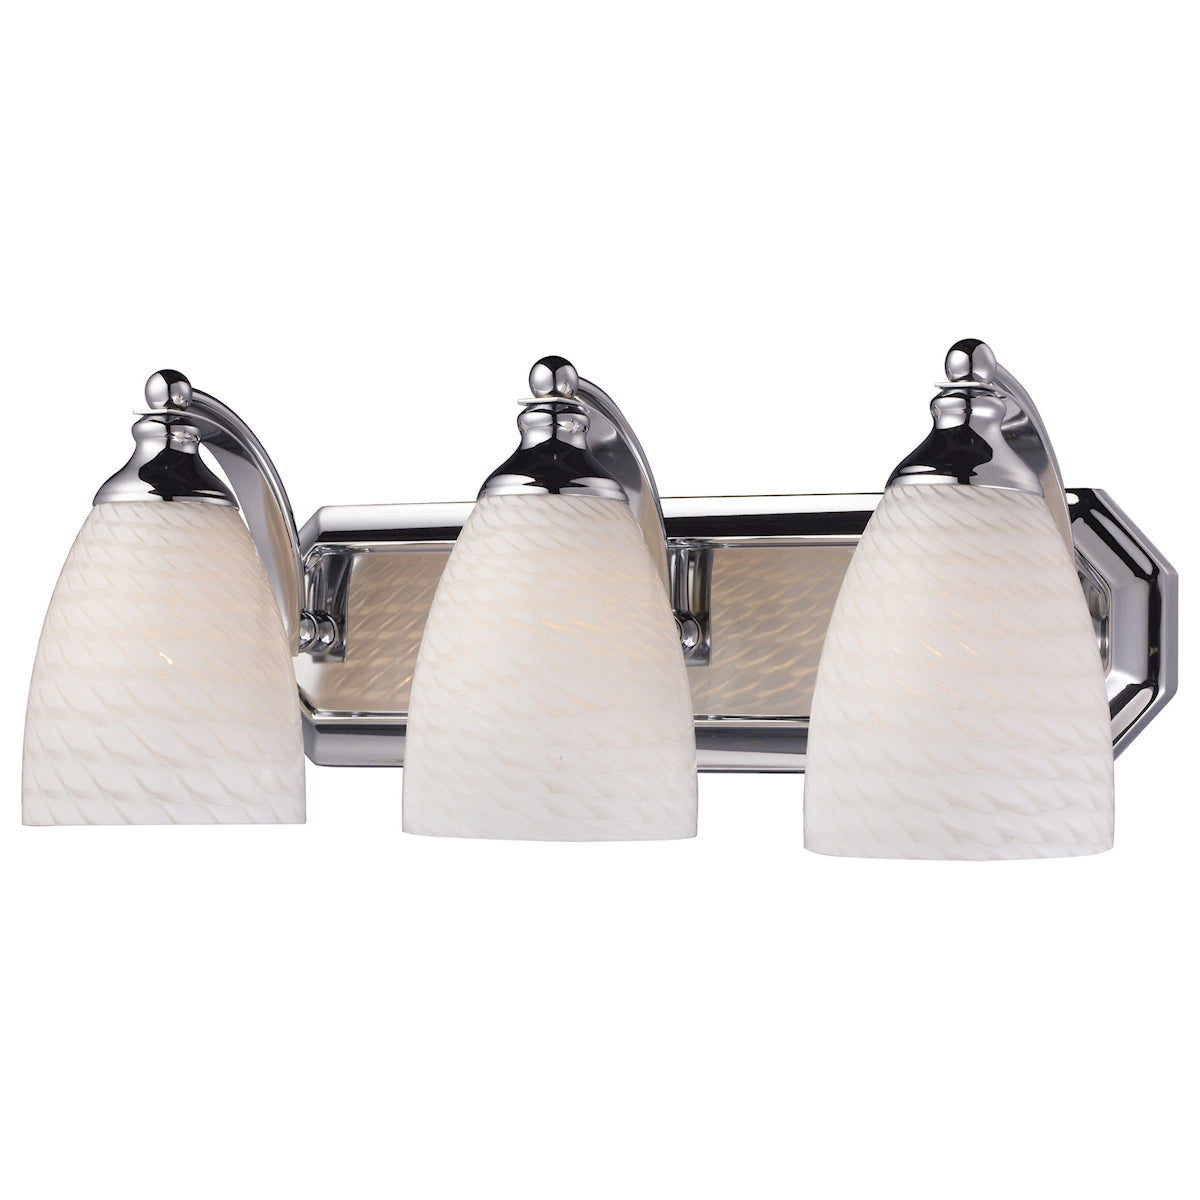 ELK Lighting 570-3C-WS Mix and Match Vanity 3-Light Wall Lamp in Chrome with White Swirl Glass